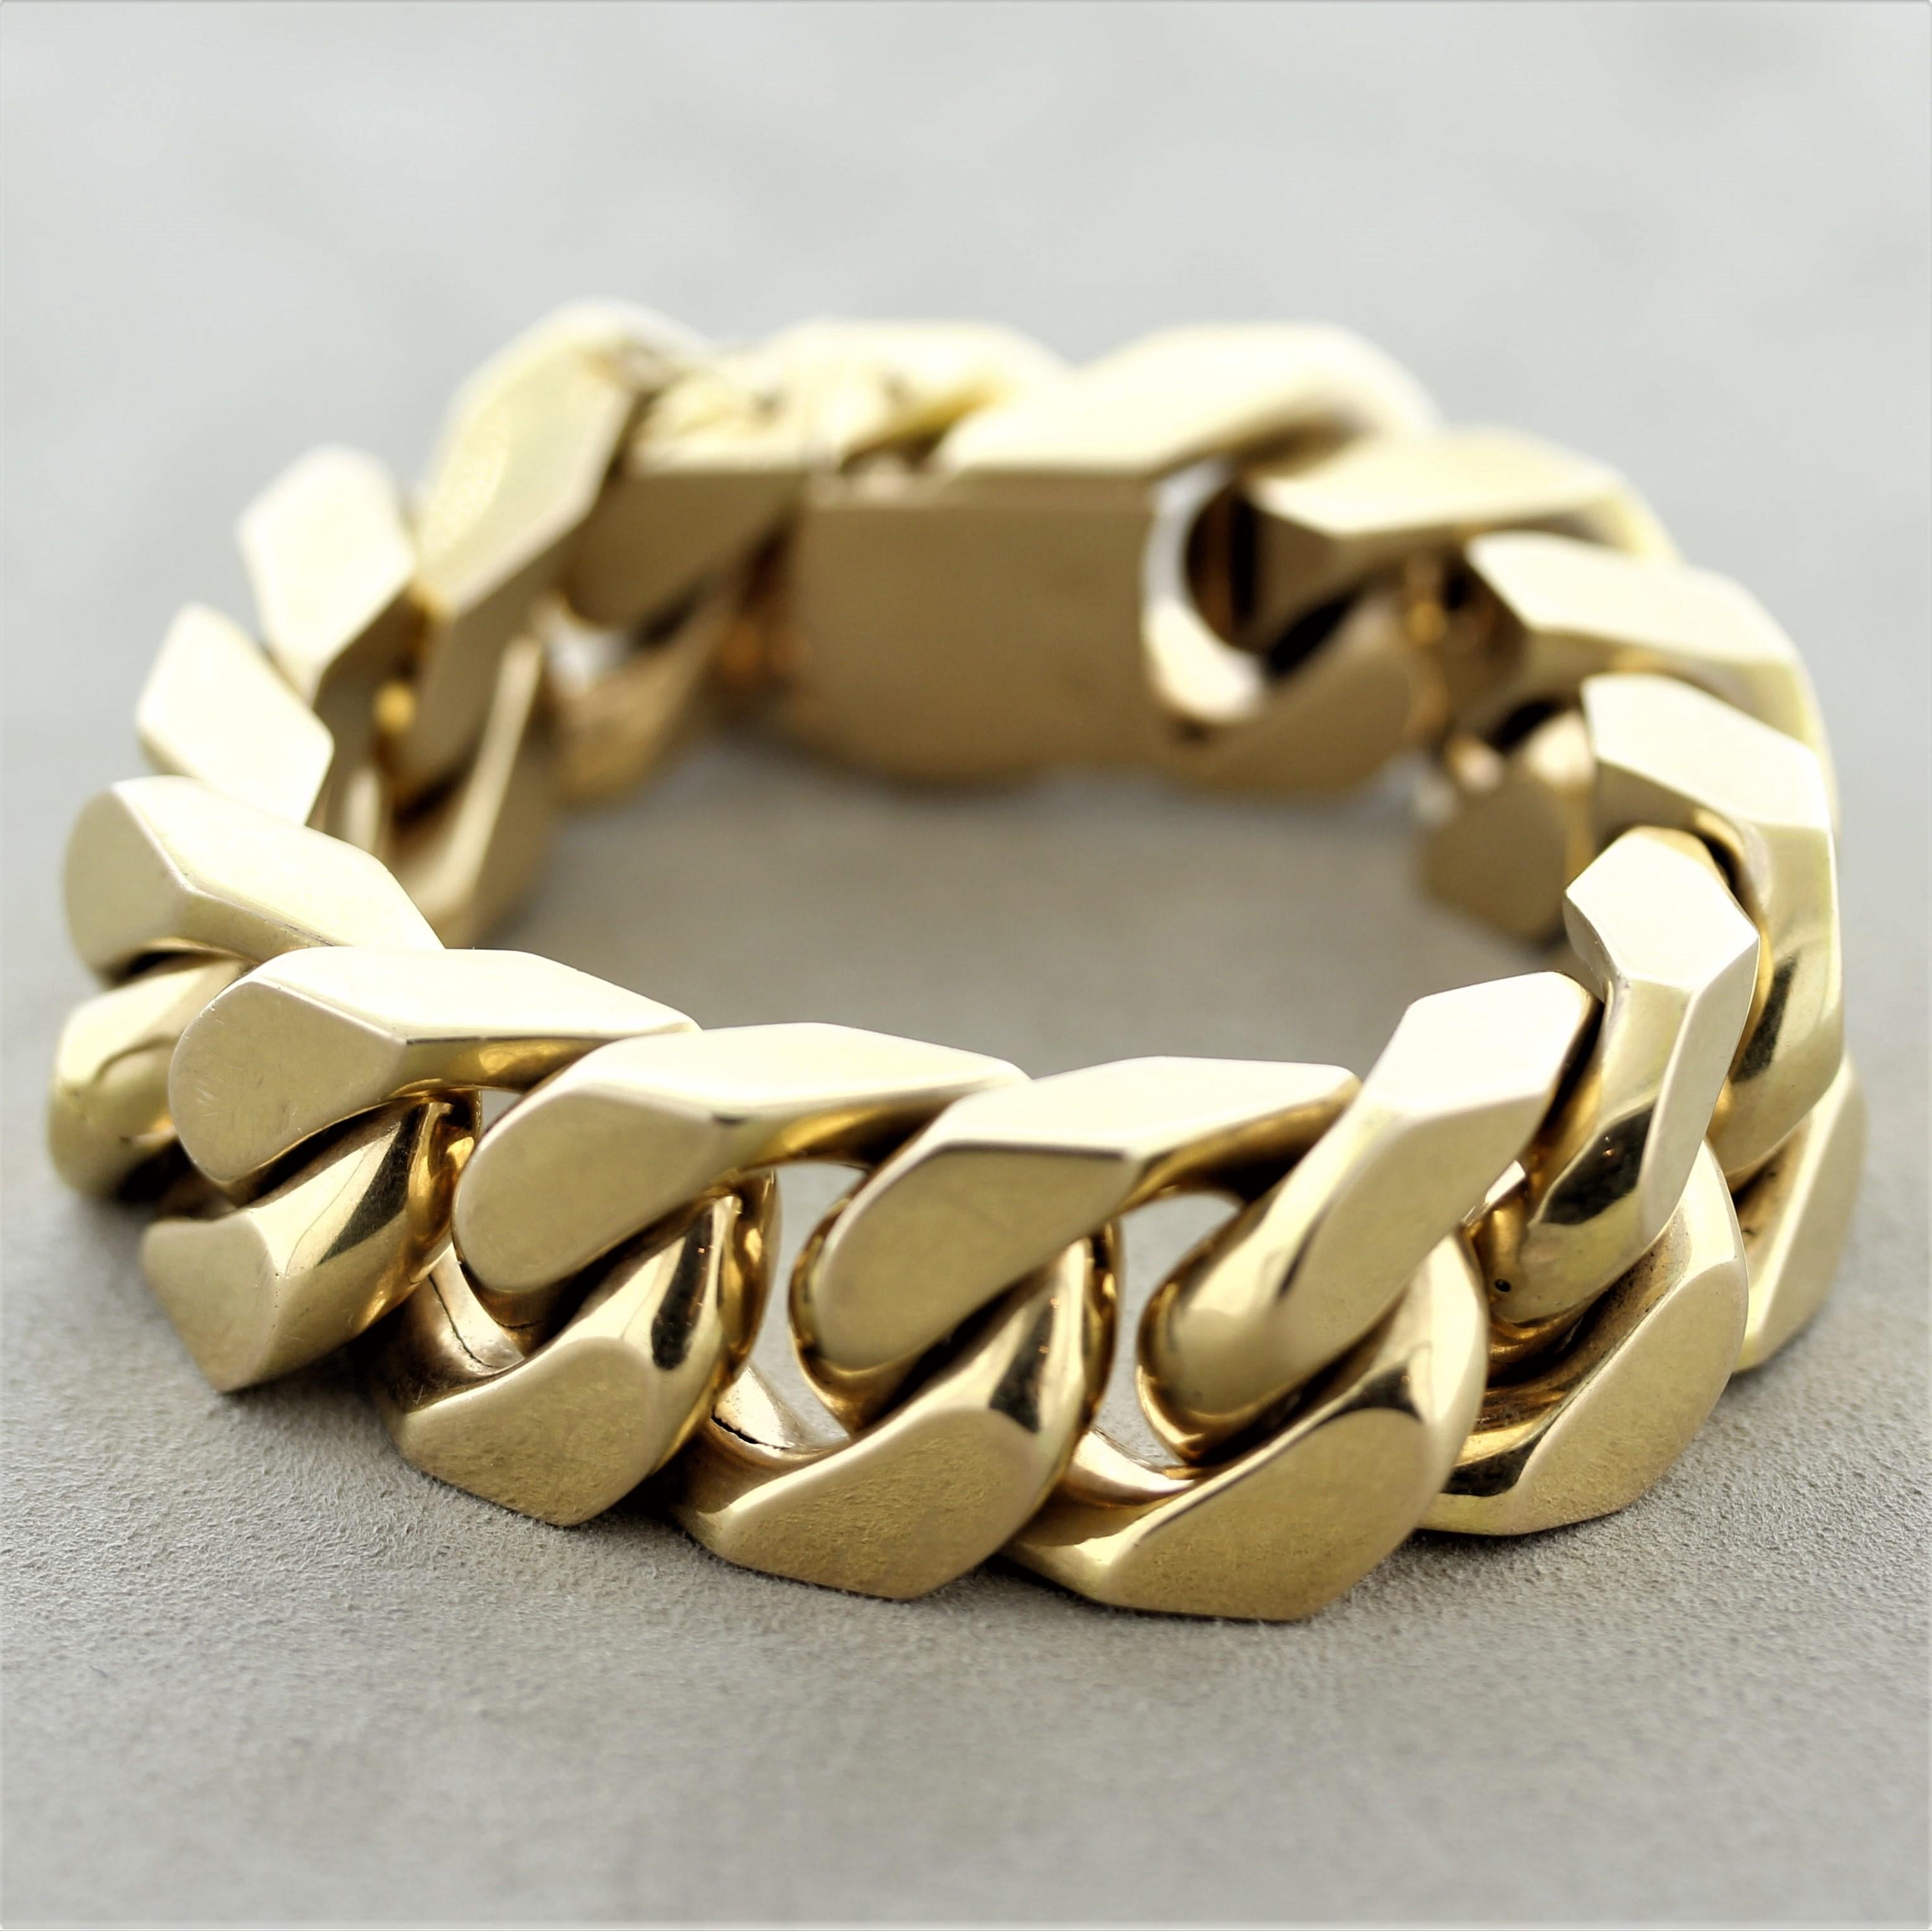 A large and chunky gold bracelet featuring Cuban links made in 18k yellow gold. The links are hollow inside giving it a lighter weight and making it more comfortable to wear. Made in solid 18k gold and ready to be worn.

Length: 8 inches

Width: 0.8